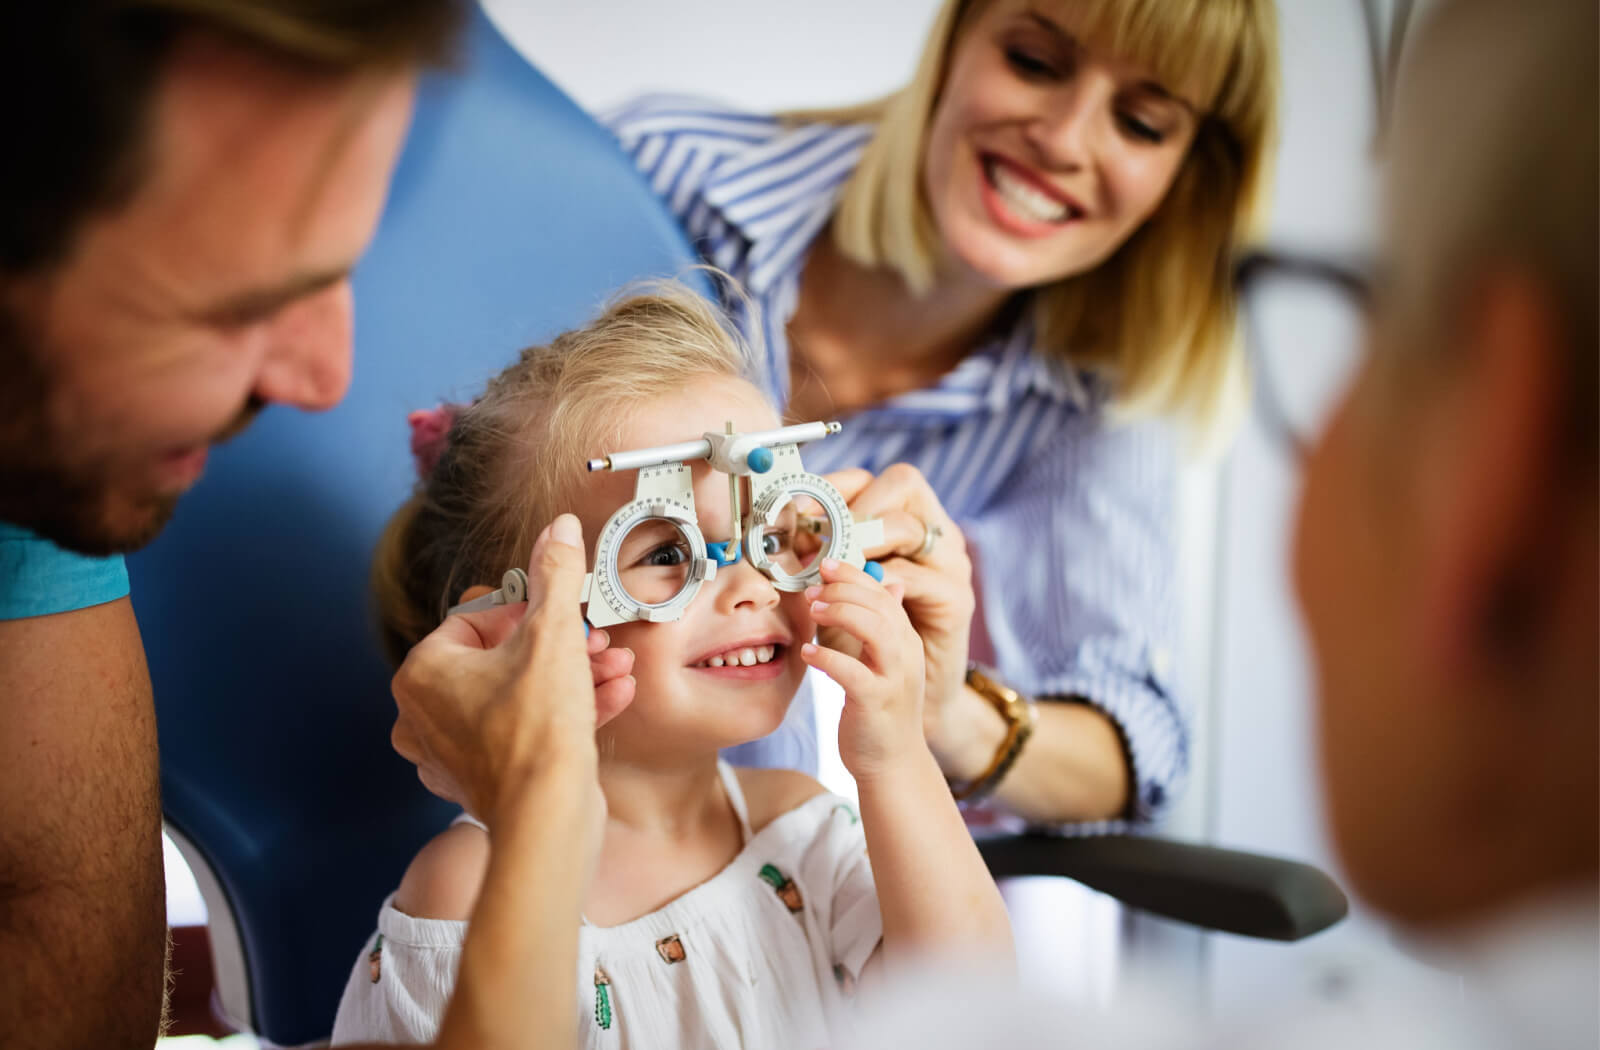 An optician is checking a female child's vision with possible myopia.